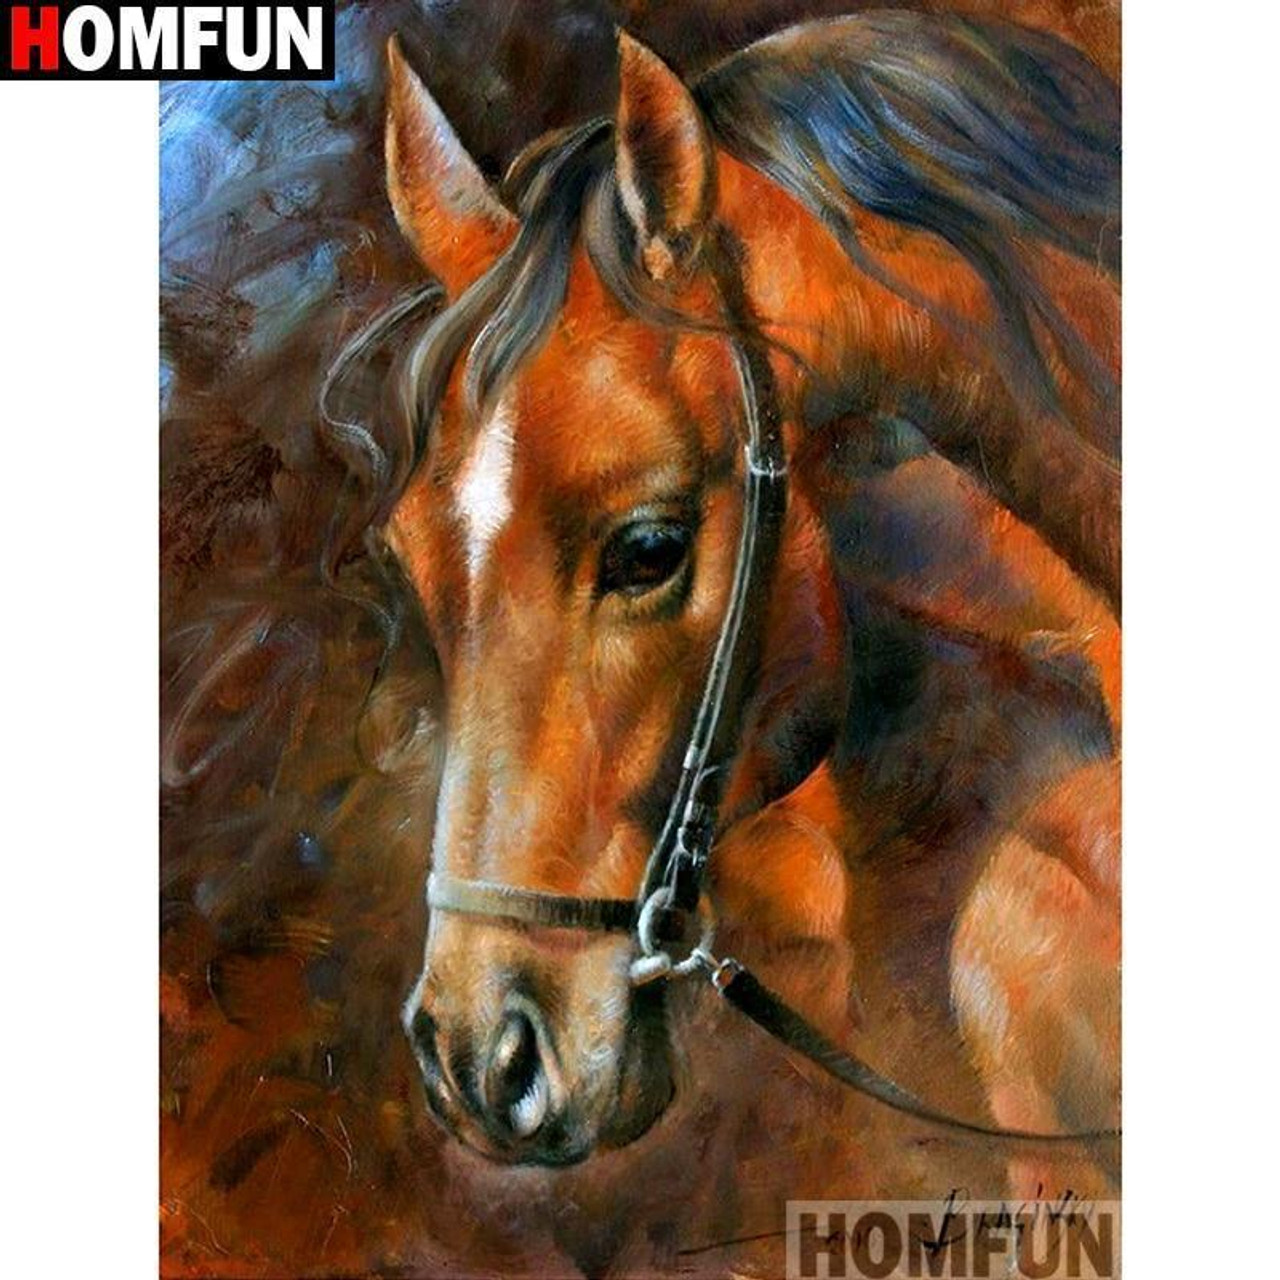 5D Diamond Painting Brown Horse With a Black Bridle Kit